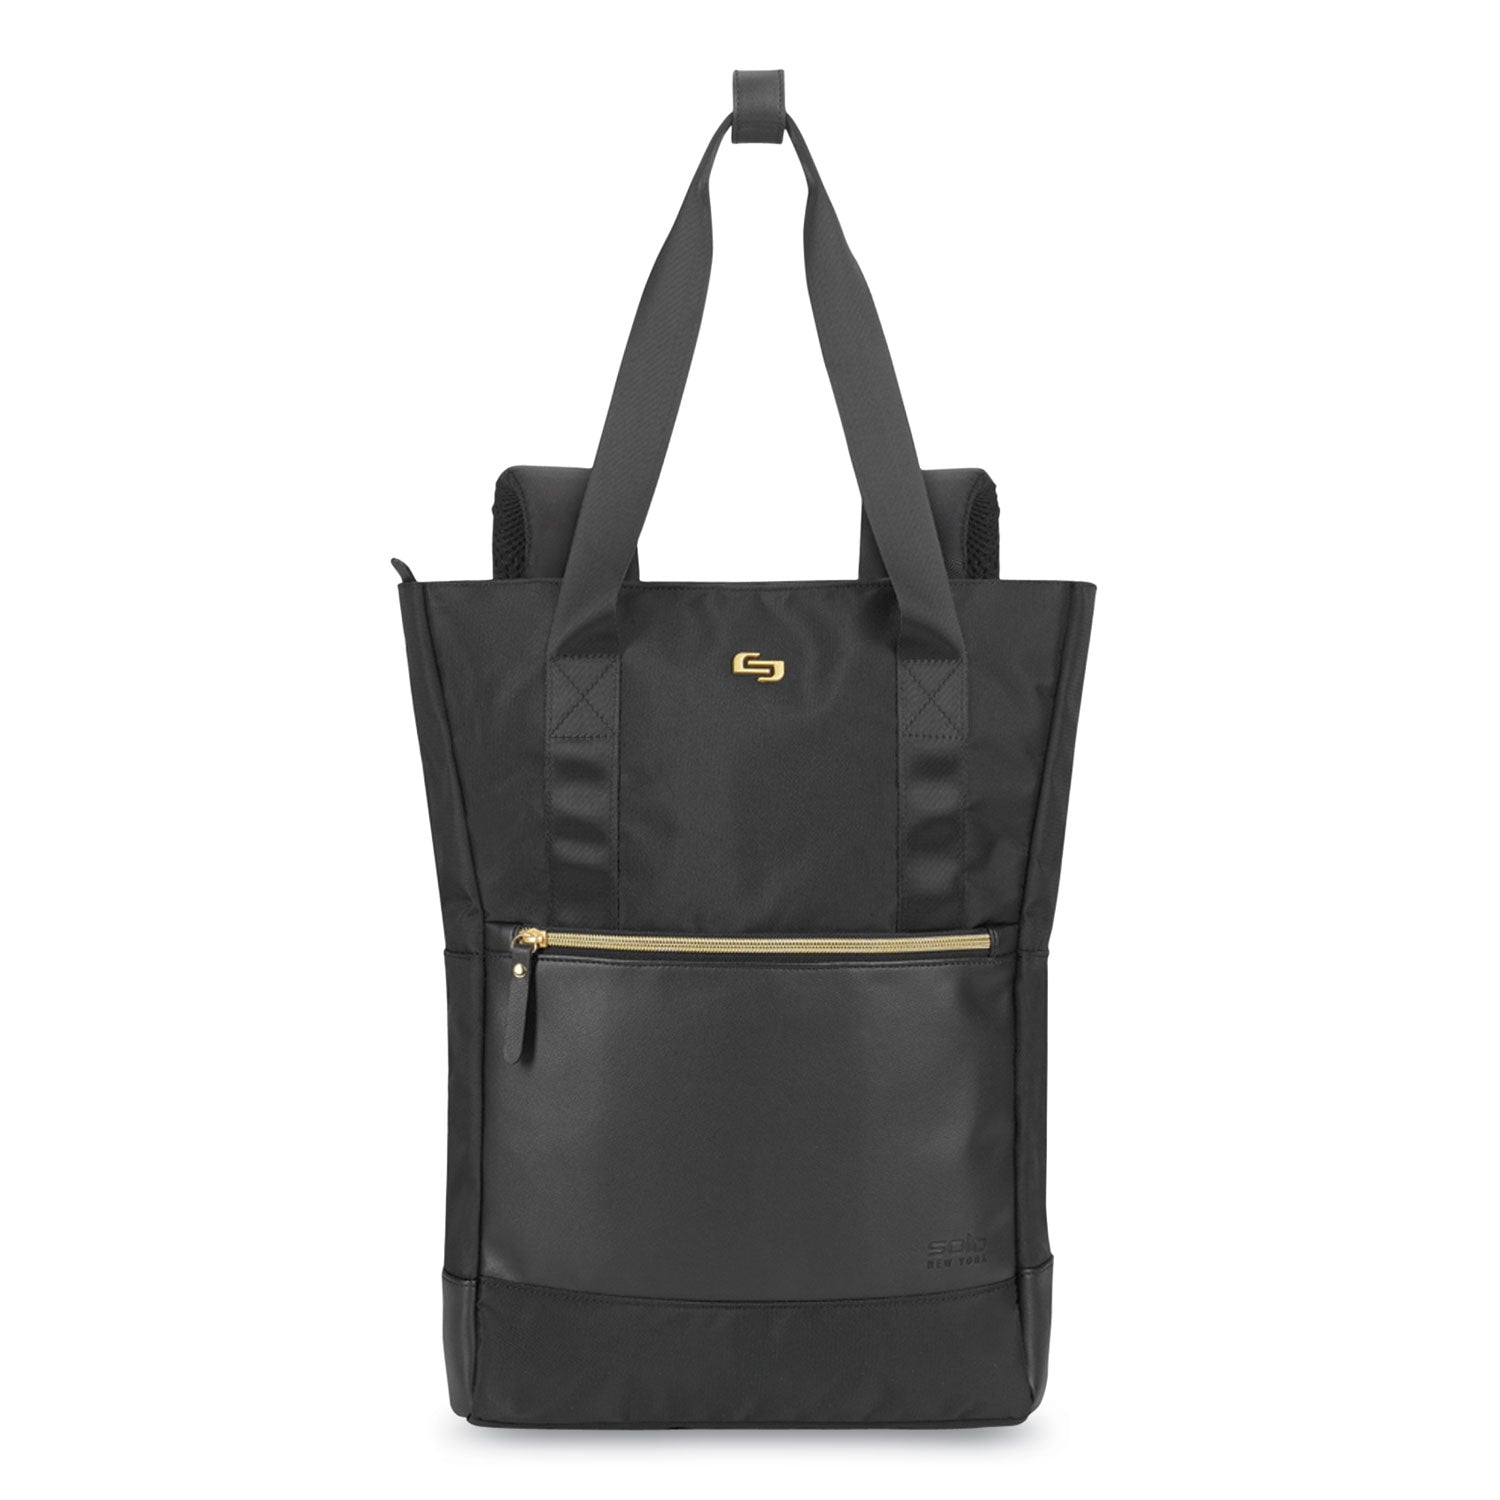 parker-hybrid-tote-backpack-fits-devices-up-to-156-polyester-375-x-165-x-165-black-gold_uslexe8014 - 1